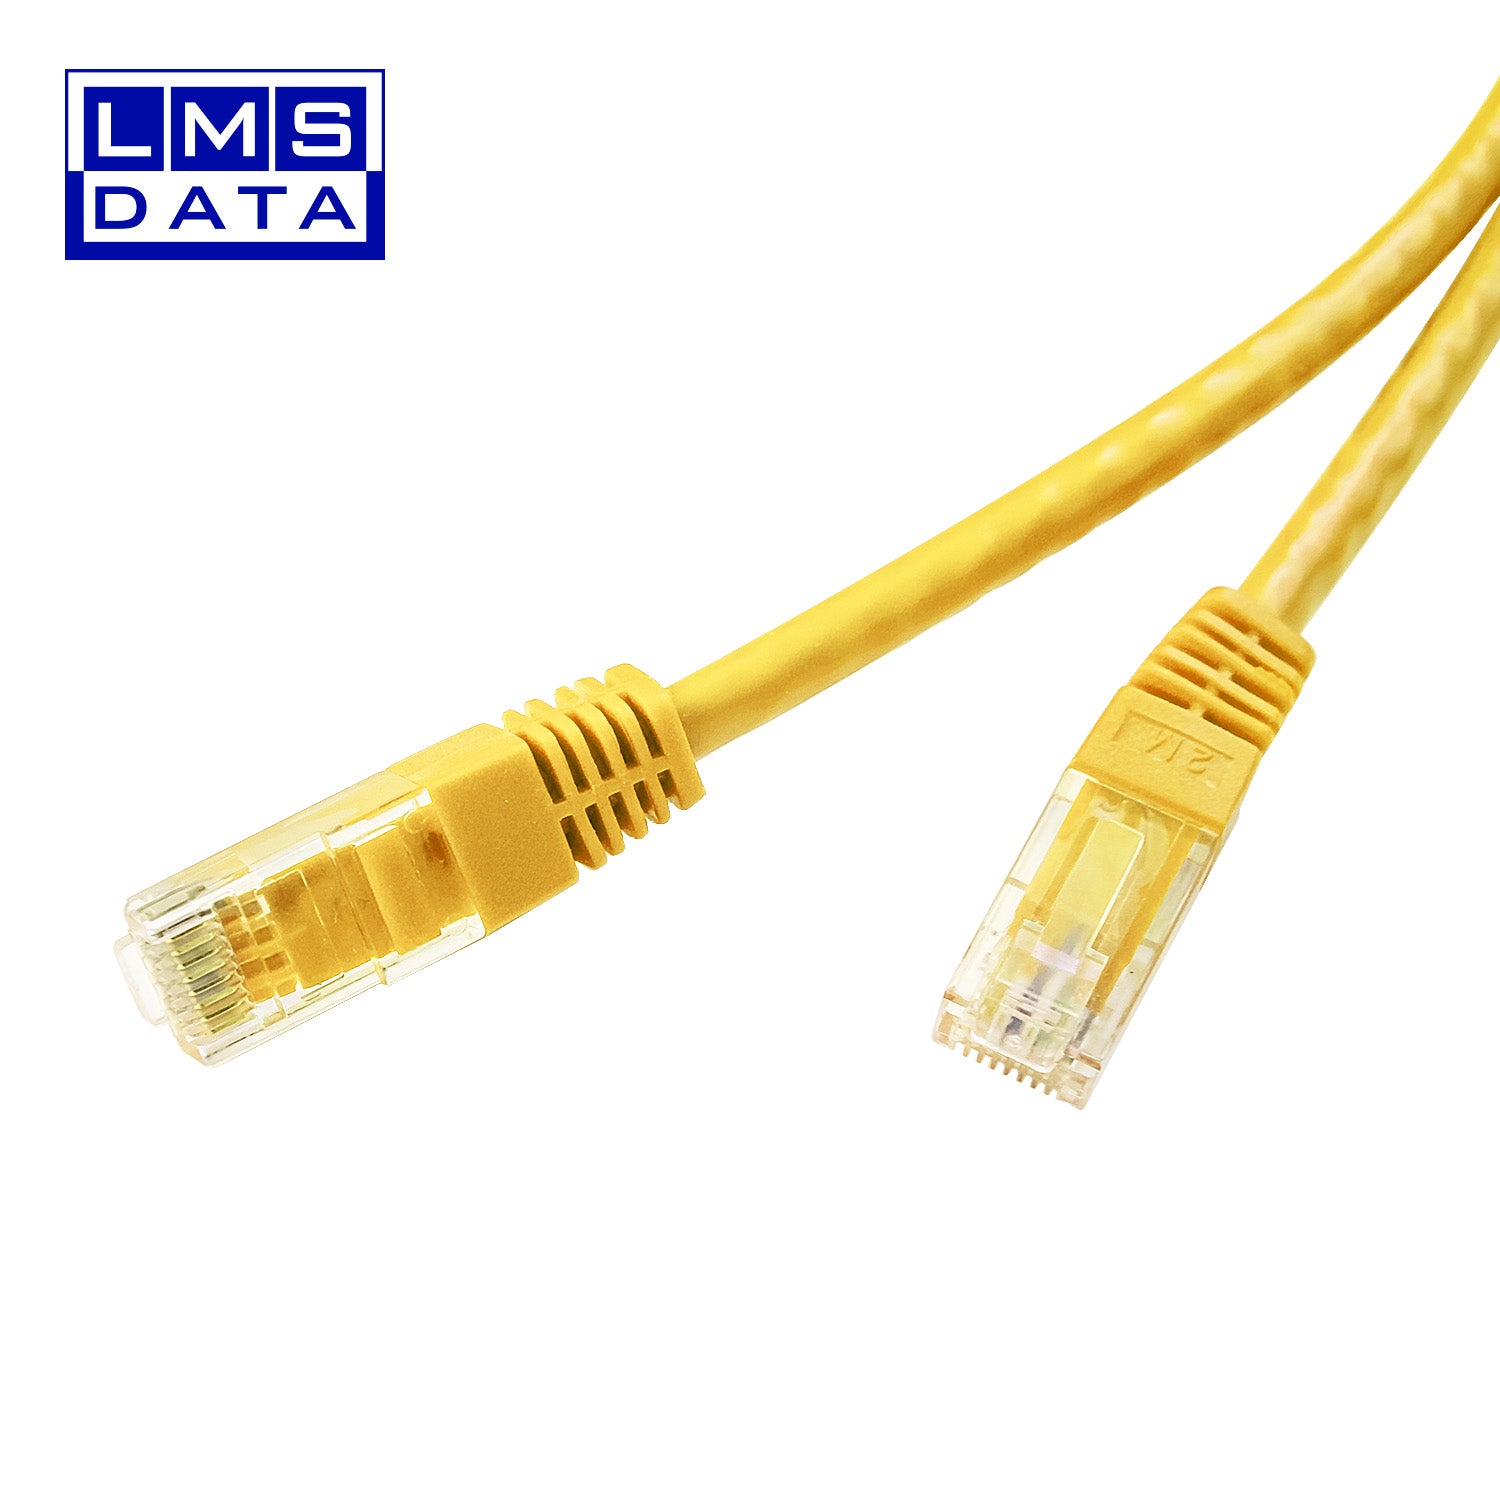 2m patch cord yellow